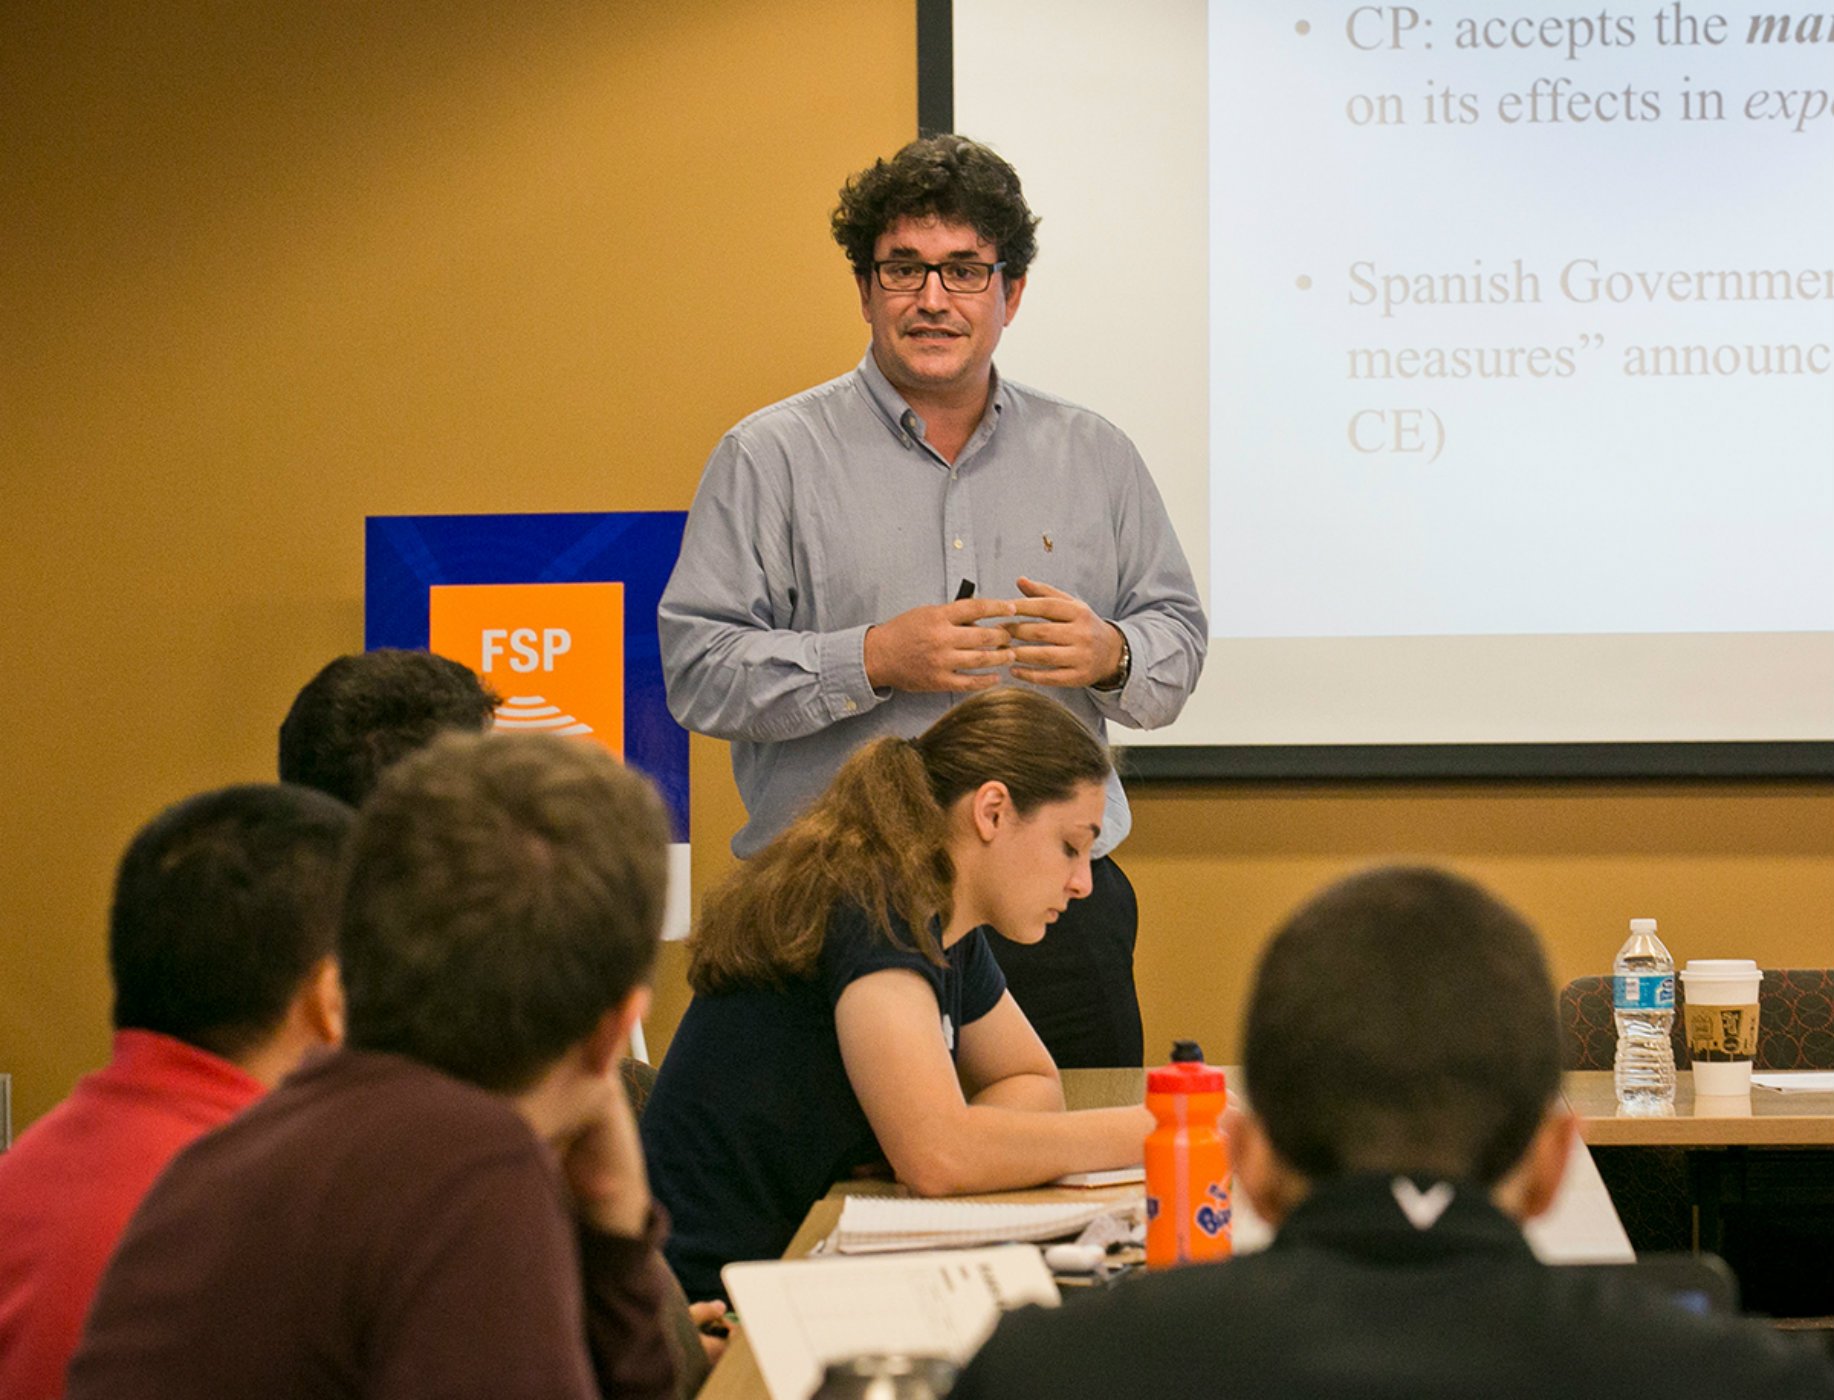 Duke University professor: "Everyone's freedom is at stake" in Catalan court case